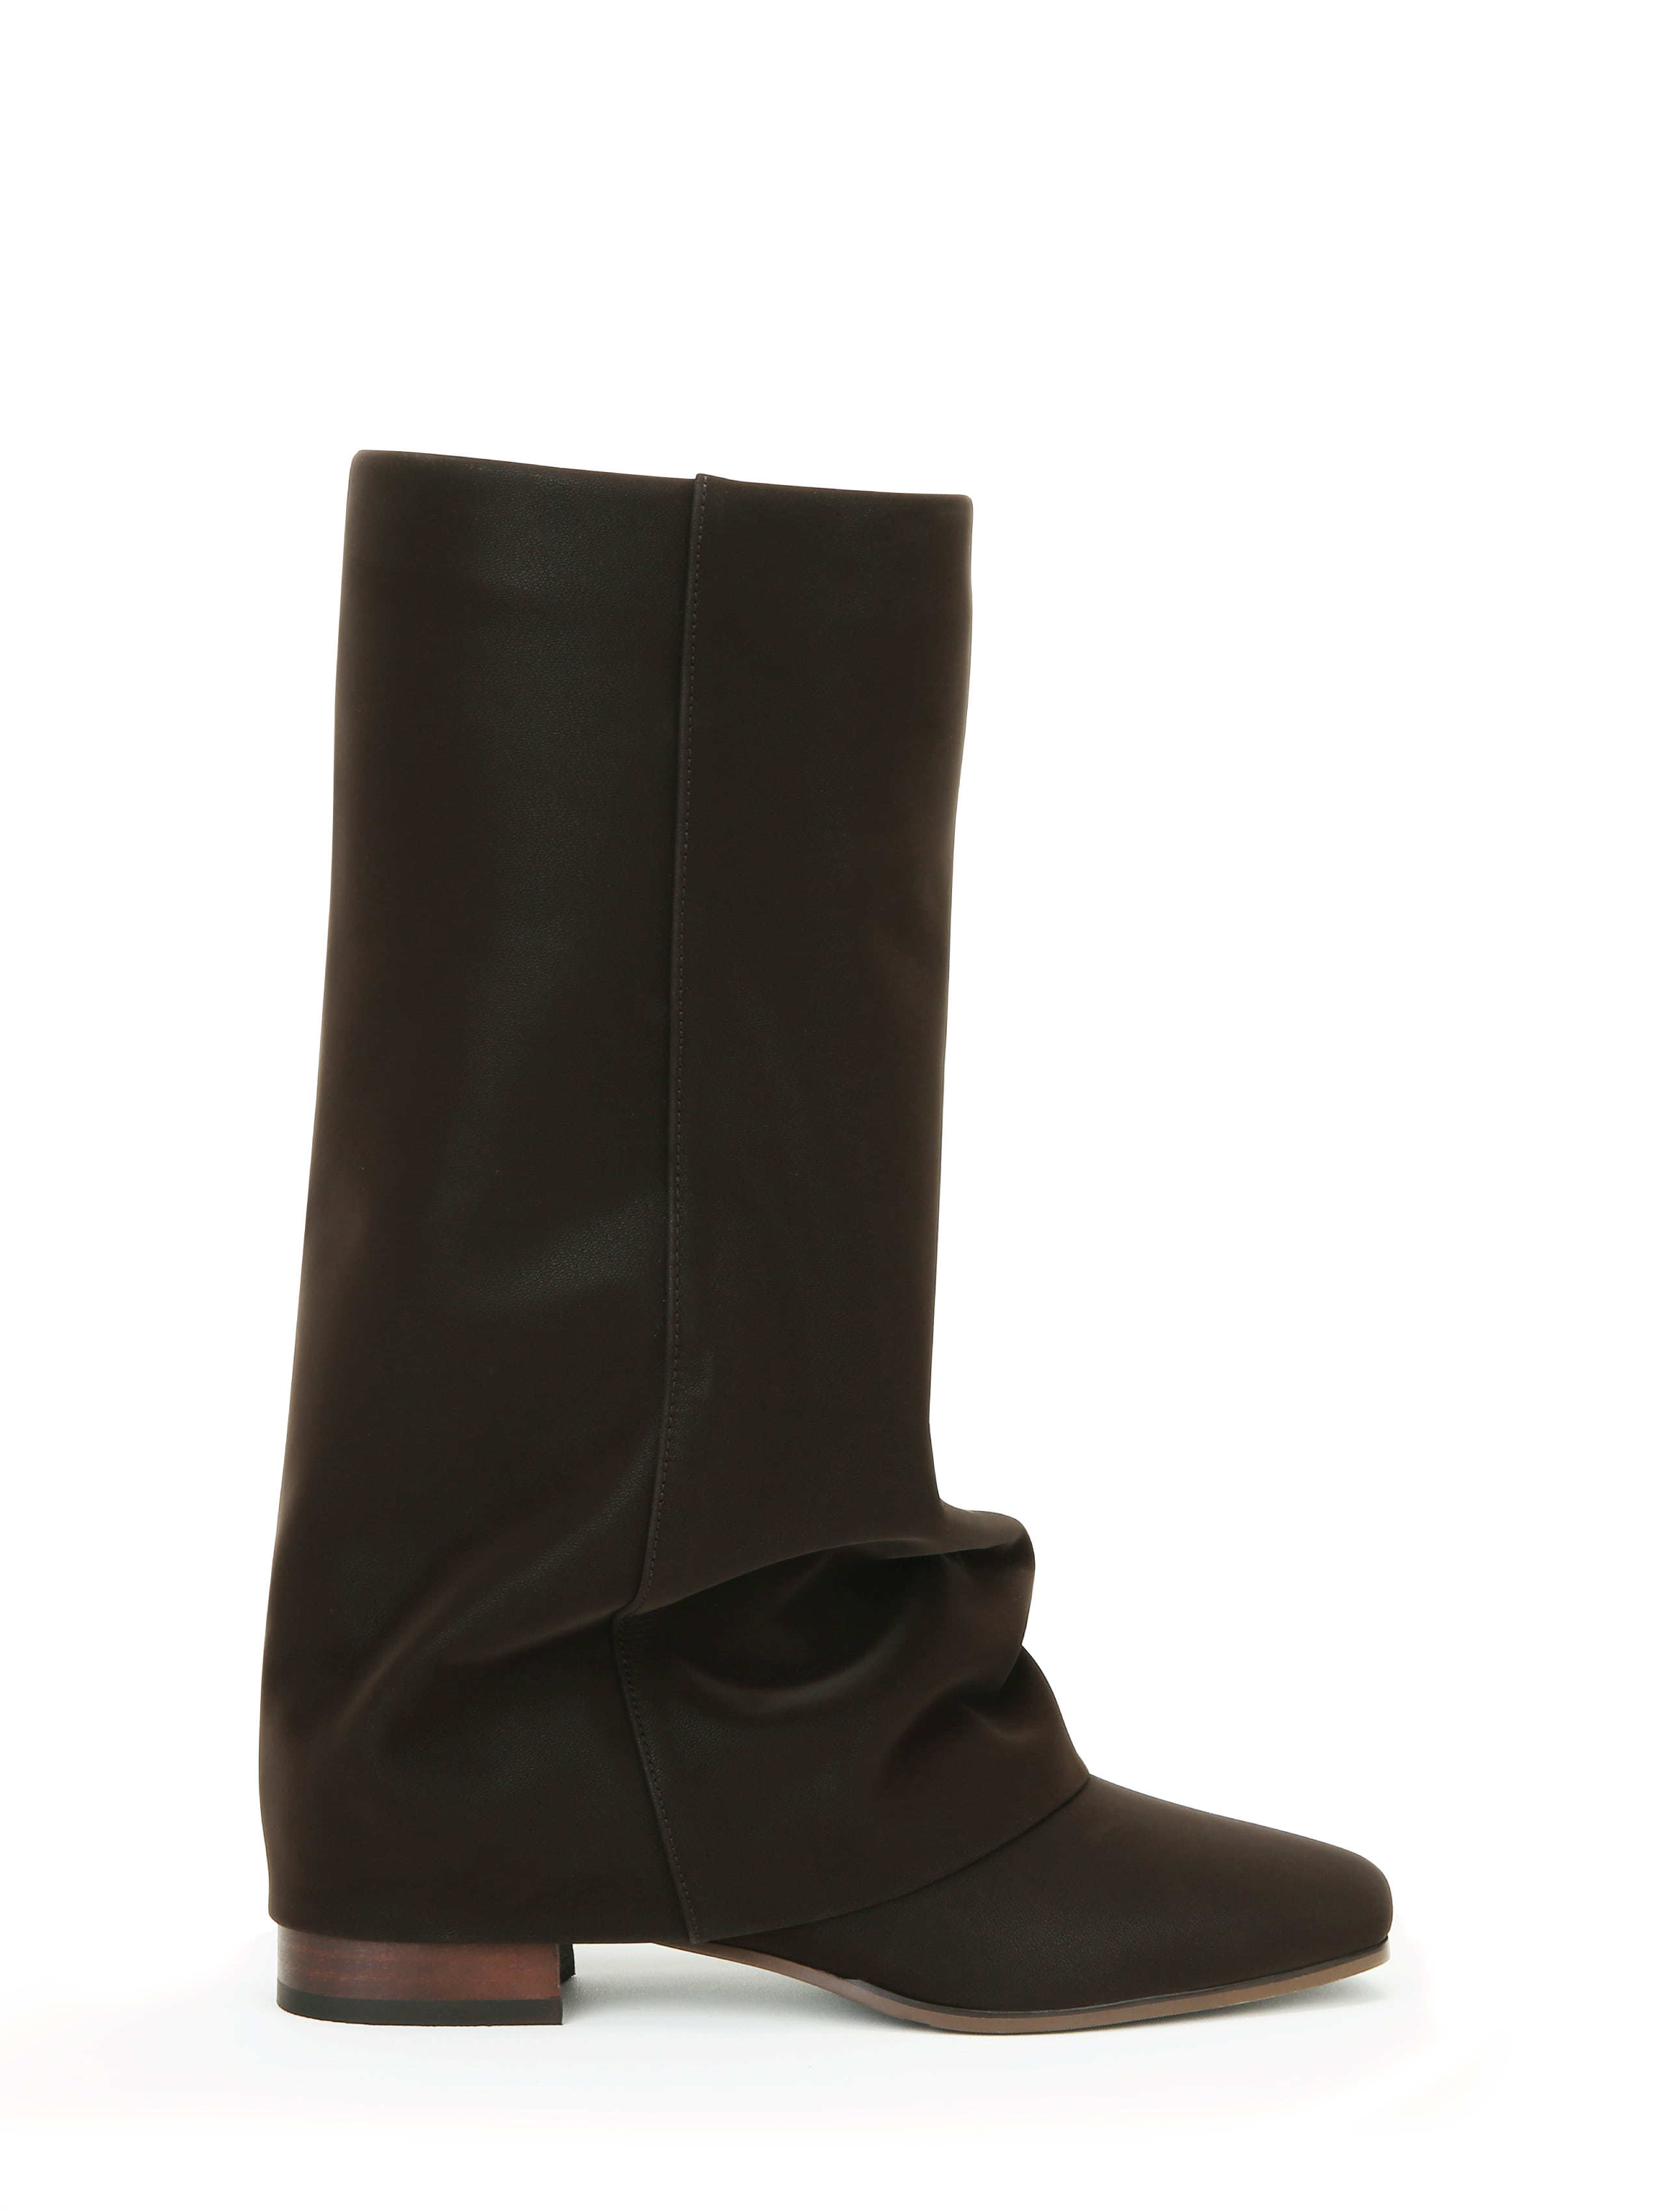 Wrinkle Leather Boots (Dark Brown) (225-255)